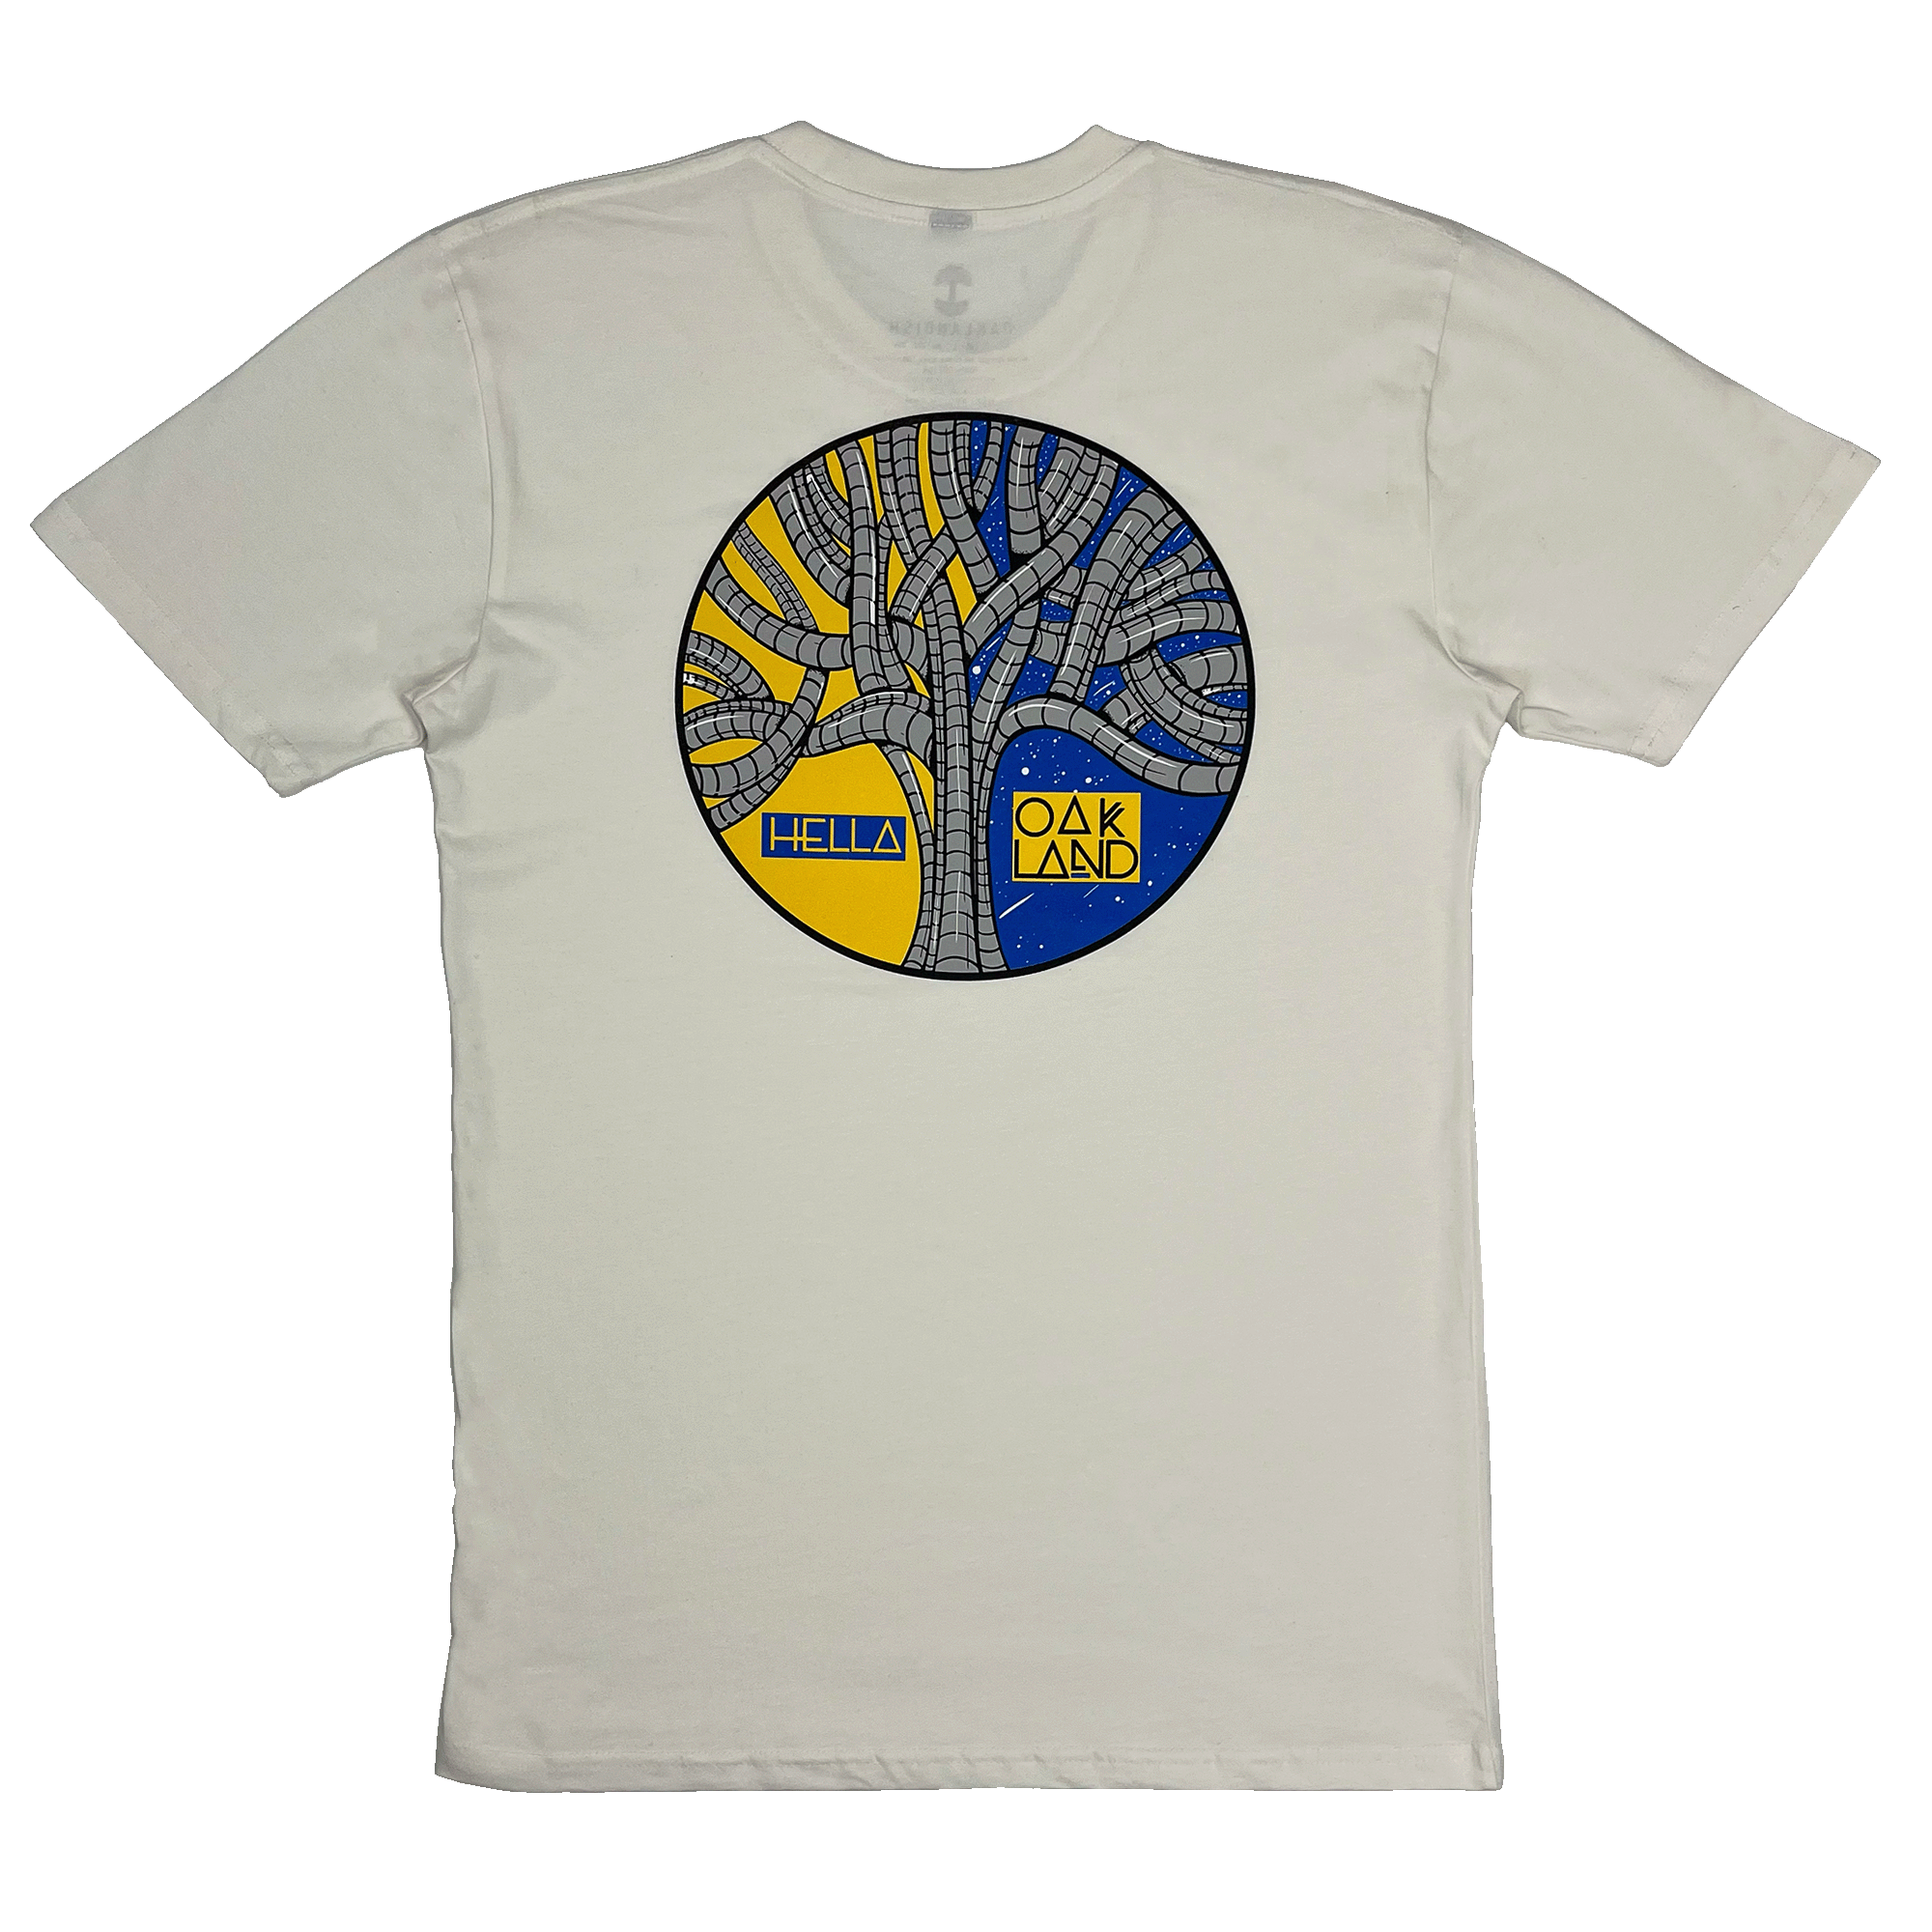 Backside view of a natural cotton-color t-shirt with graphic art designed by Oakland artist HellaFutures and HELLA OAKLAND wordmark.